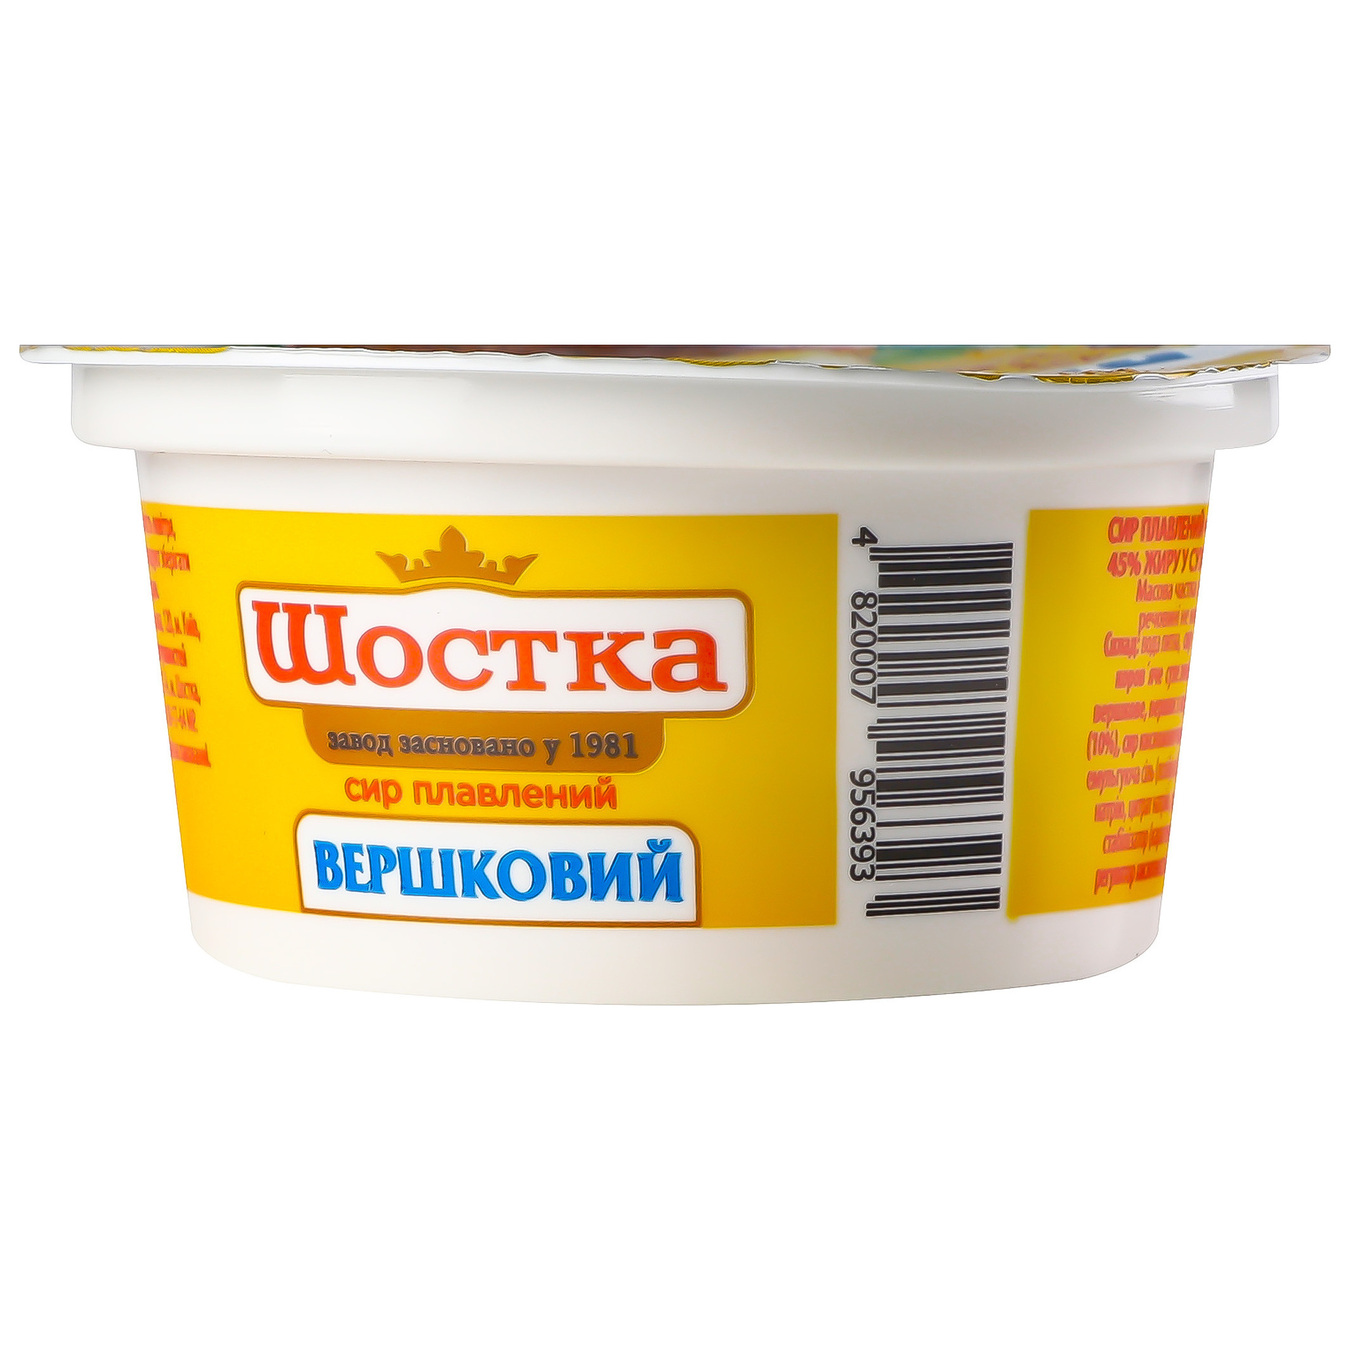 Shostka melted cream cheese 45% 150g 2